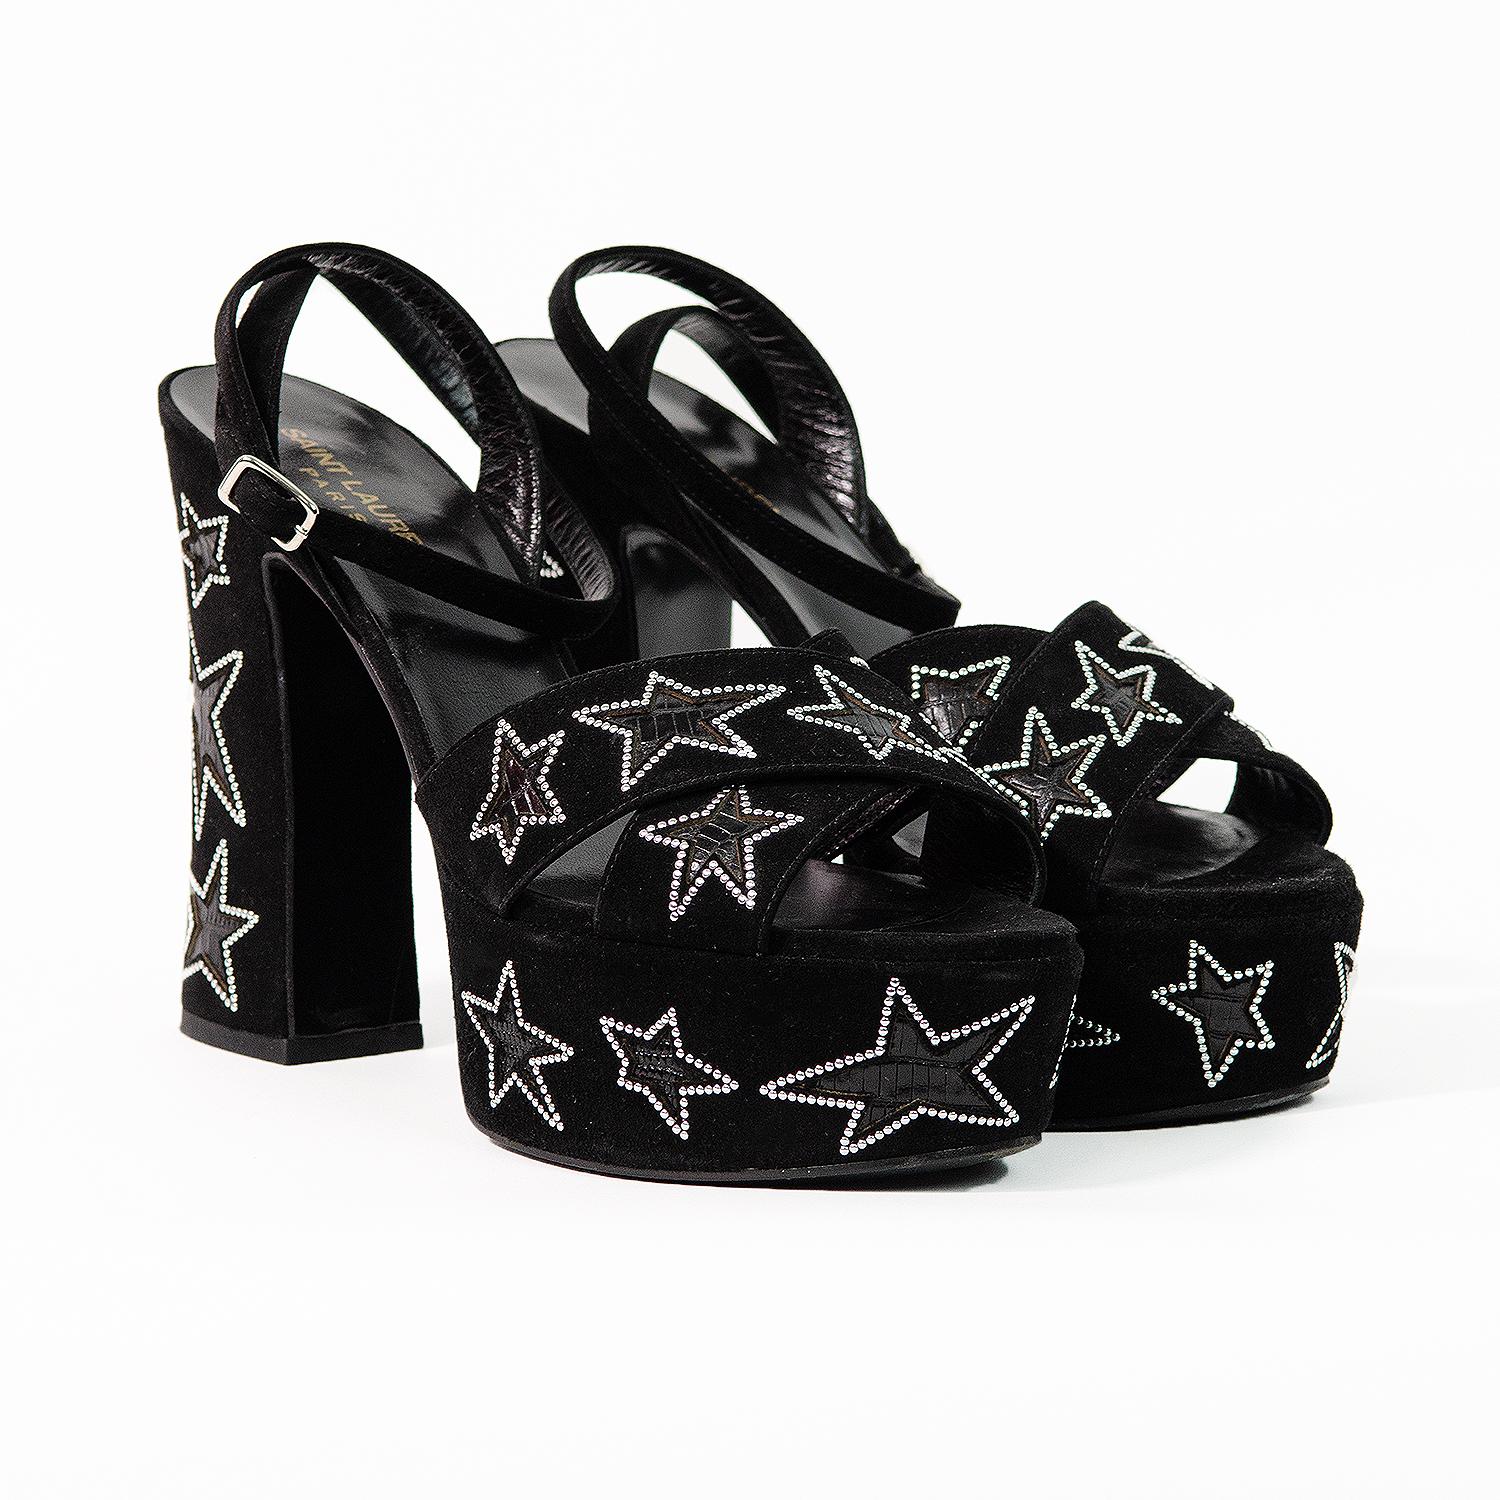 The most incredible 1970s inspired platform sandals by Saint Laurent with star embellishment. The model is Farrah. These rare platform sandals are the perfect statement shoe! 

These star studded platforms feature a block heel, an ankle strap with a